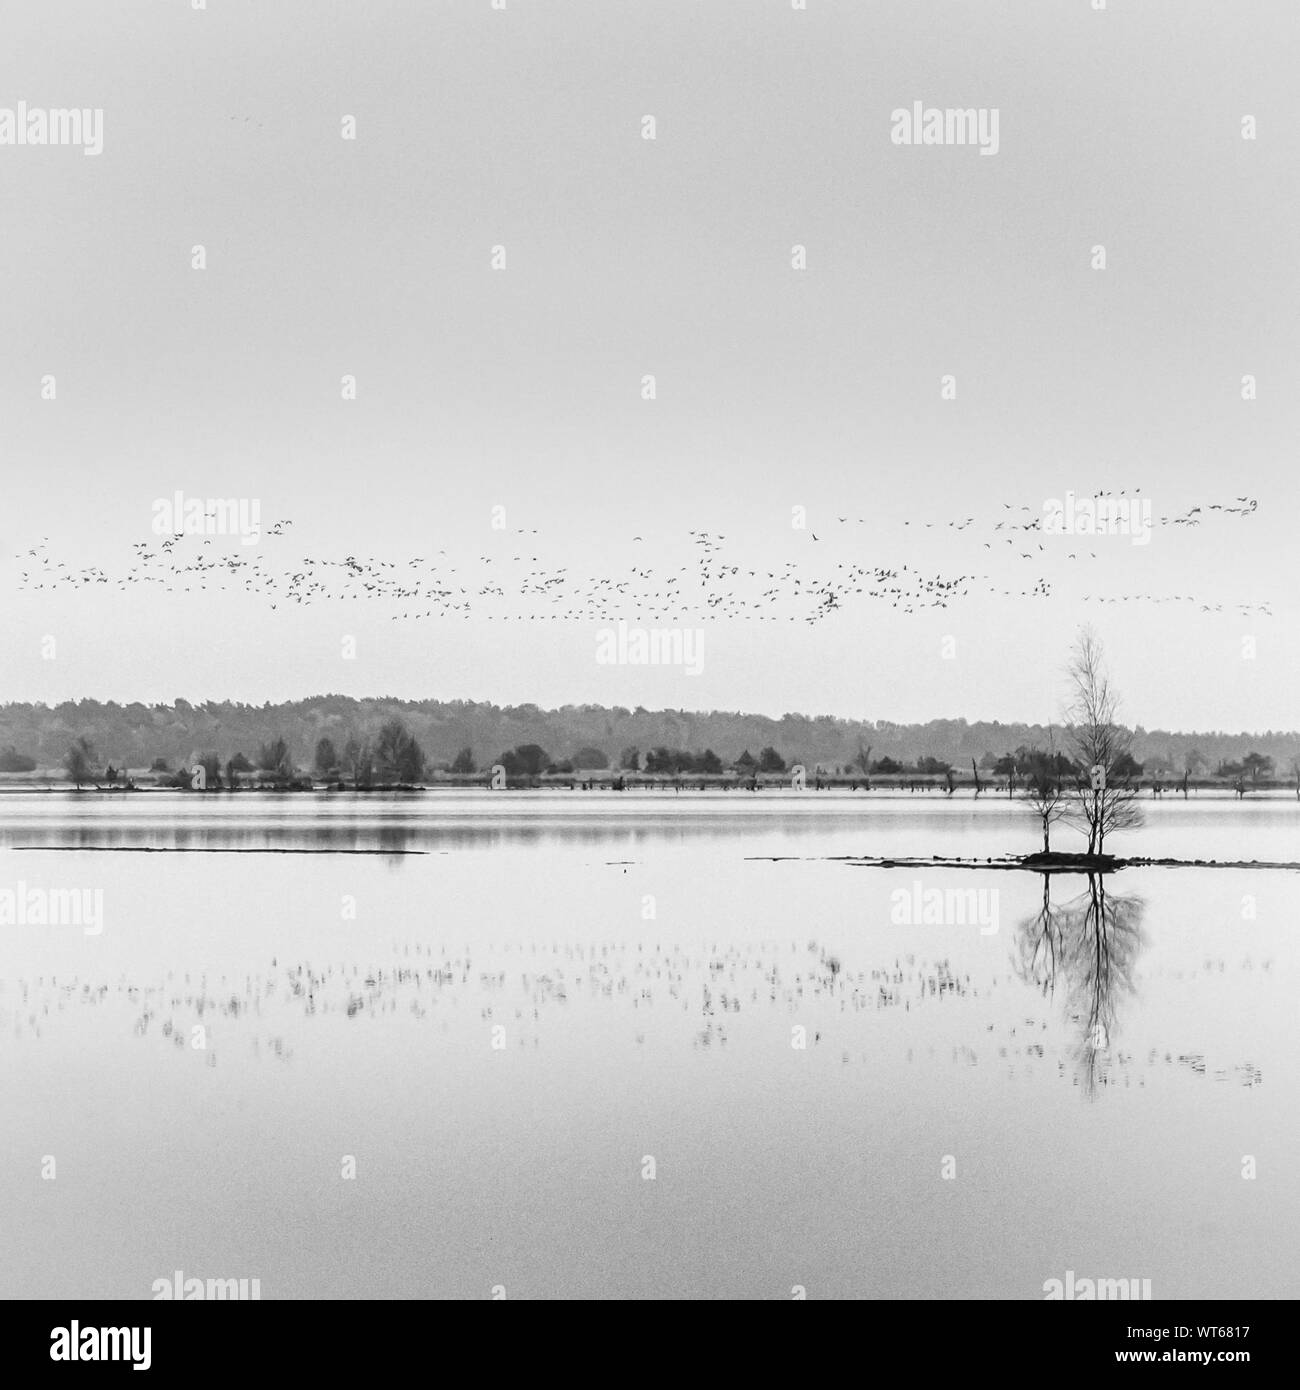 Flock Of Birds Flying Over The Lake Stock Photo